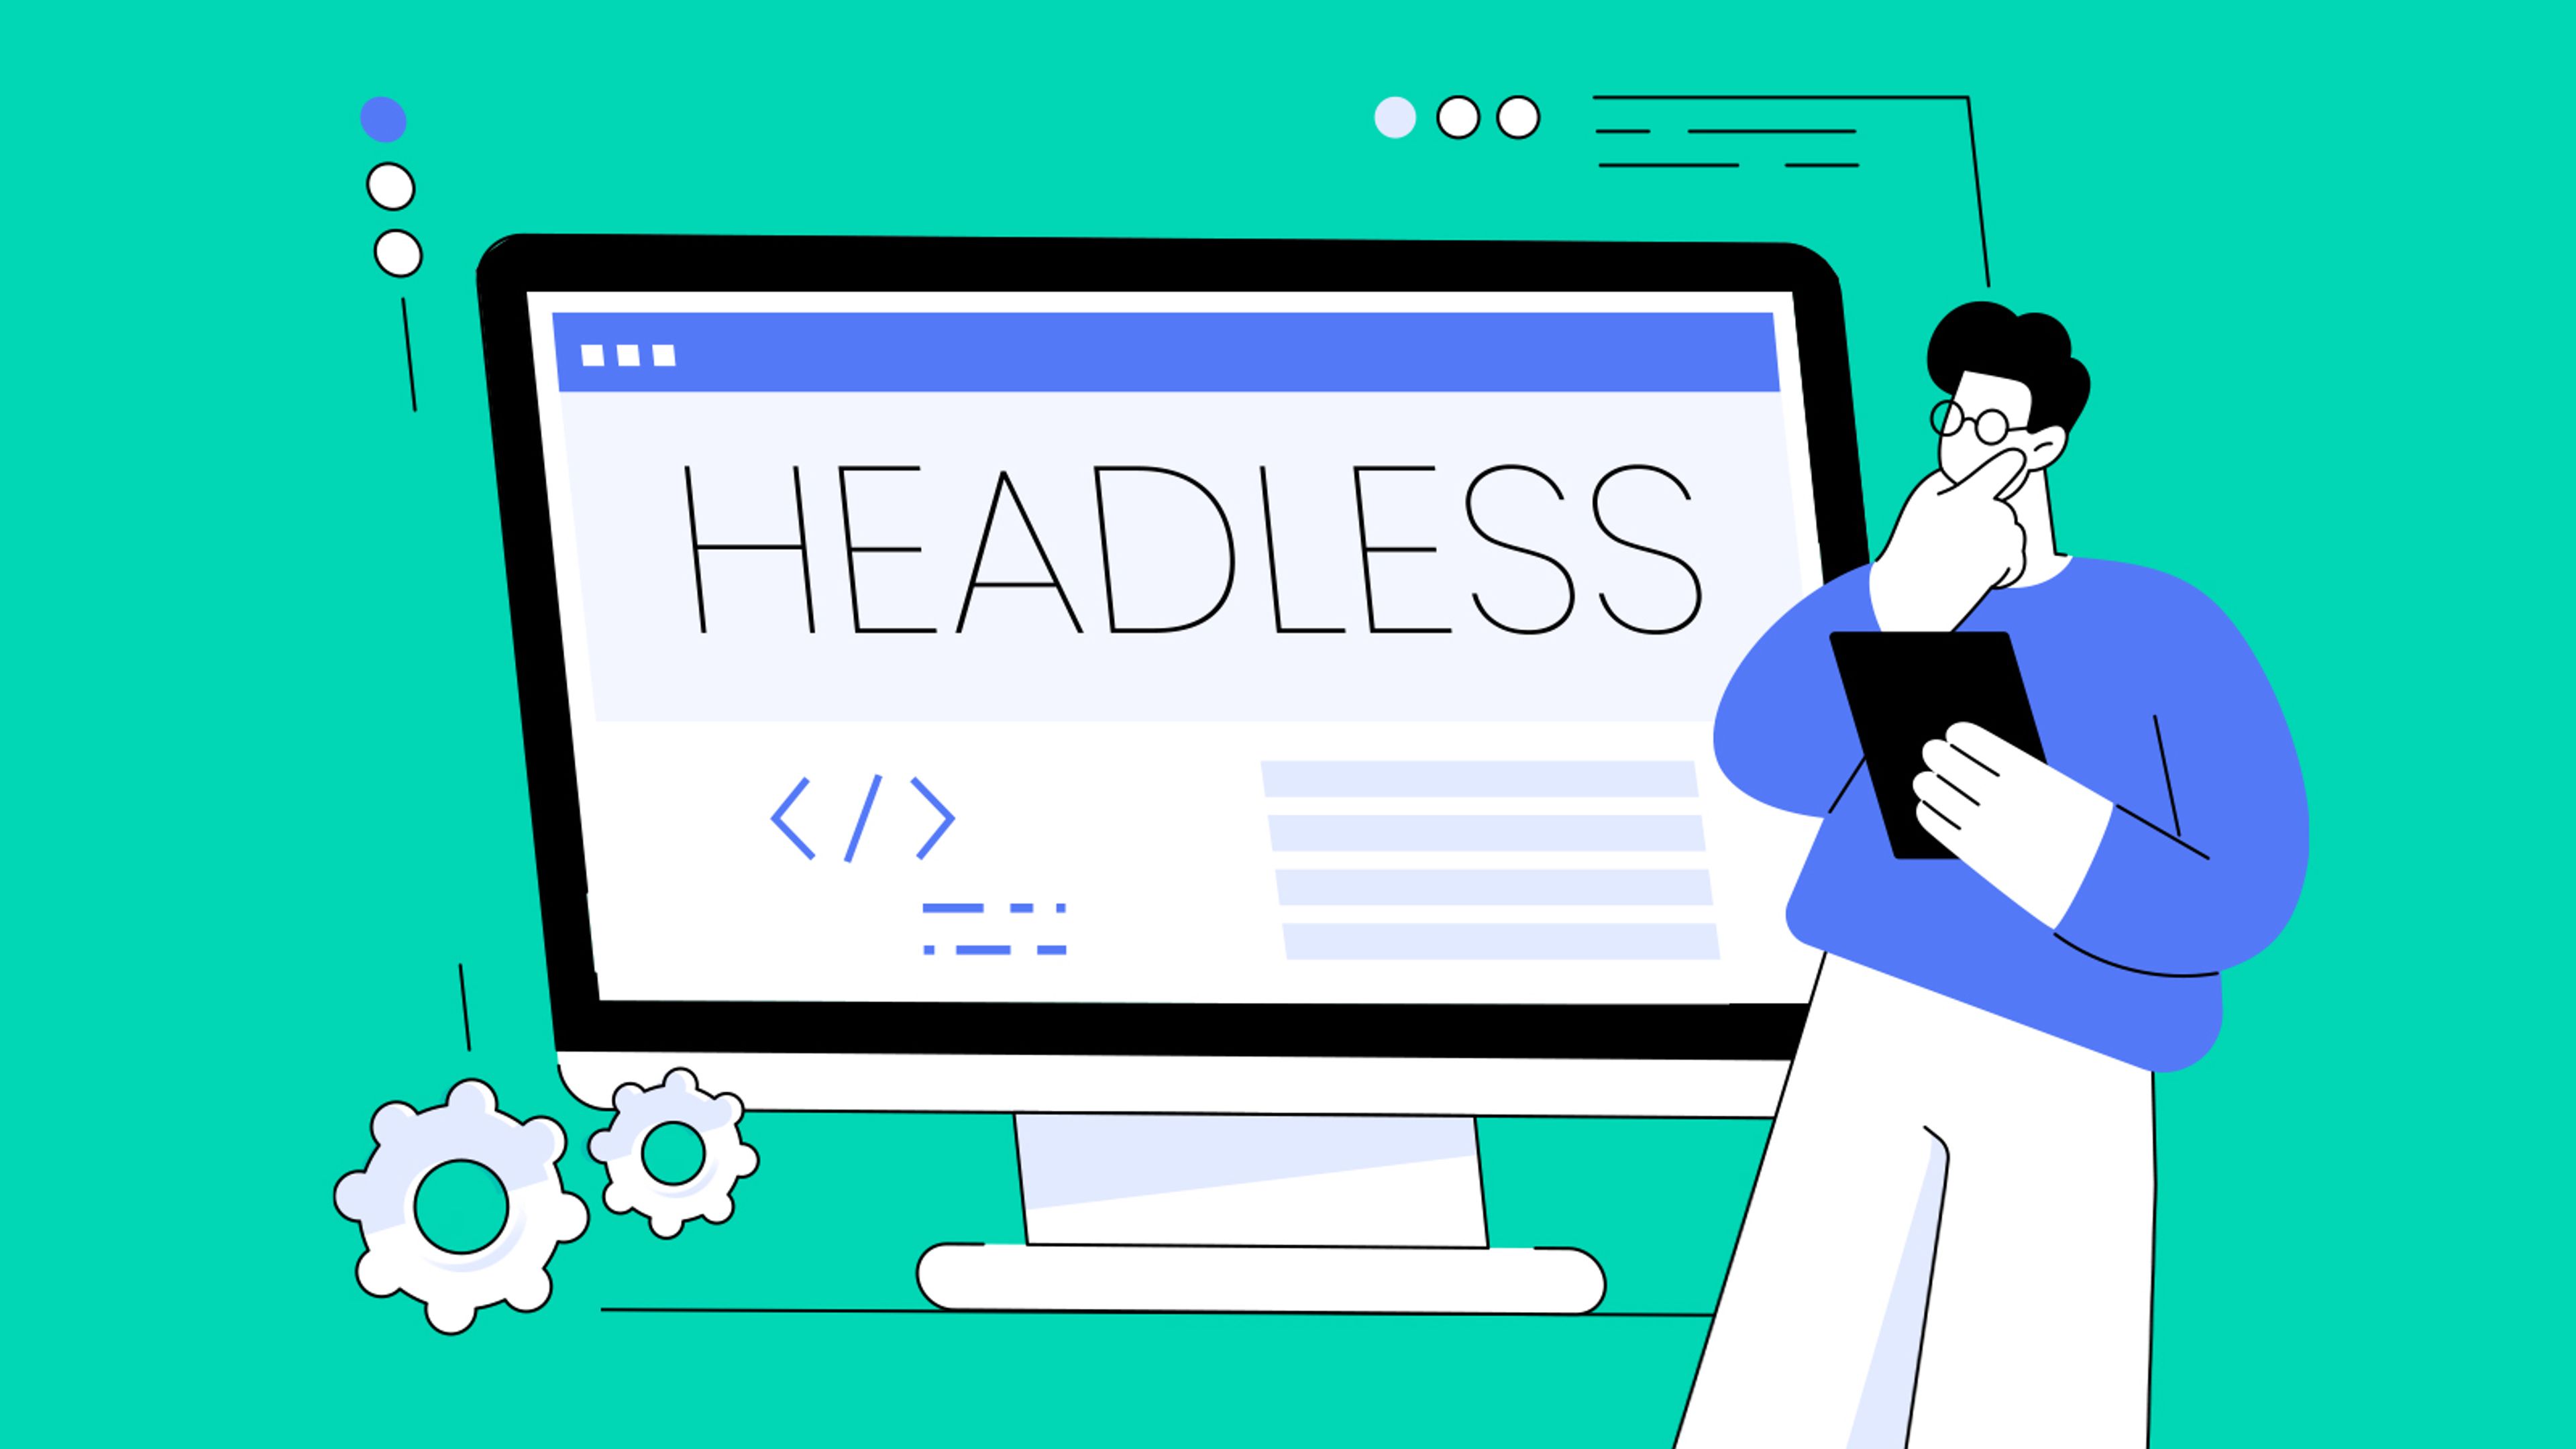 Graphic vector image of an man studying a computer screen with the word "headless" on it